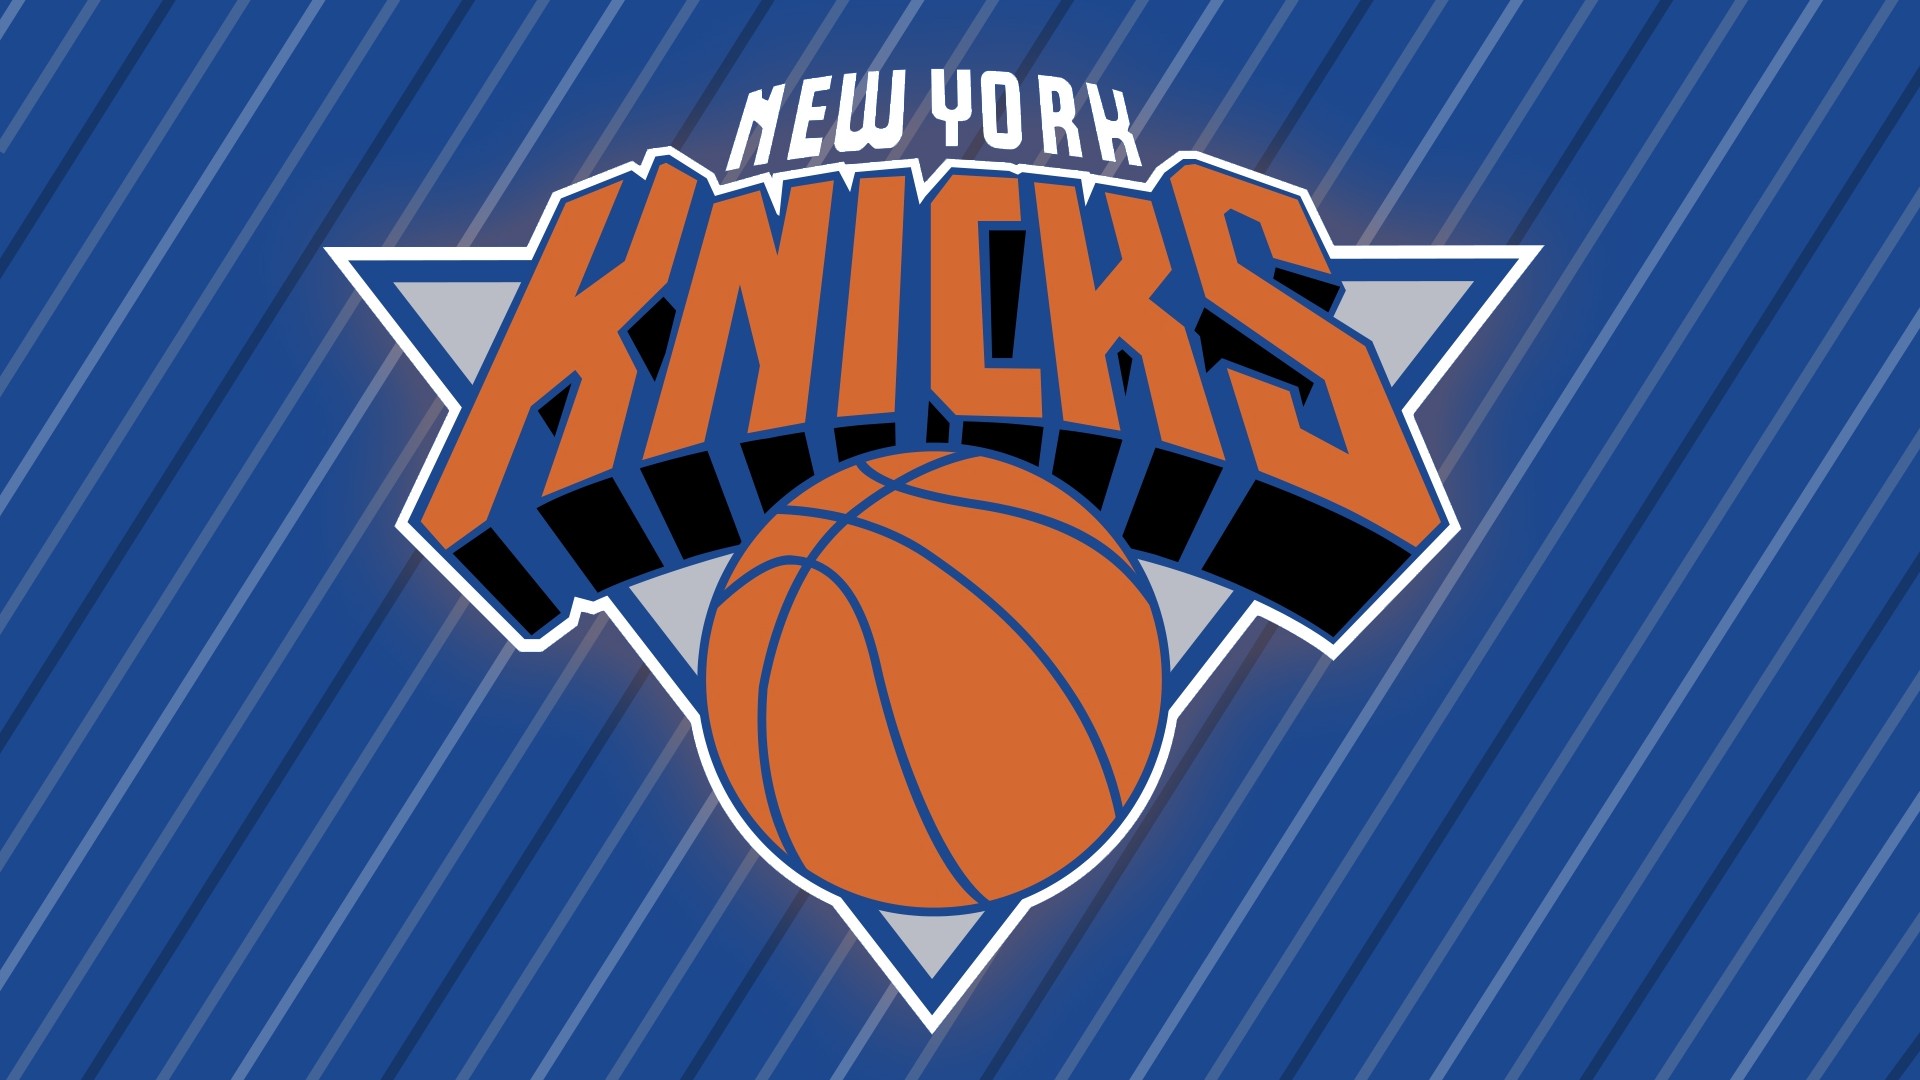 NY Knicks Wallpaper with image dimensions 1920x1080 pixel. You can make this wallpaper for your Desktop Computer Backgrounds, Windows or Mac Screensavers, iPhone Lock screen, Tablet or Android and another Mobile Phone device